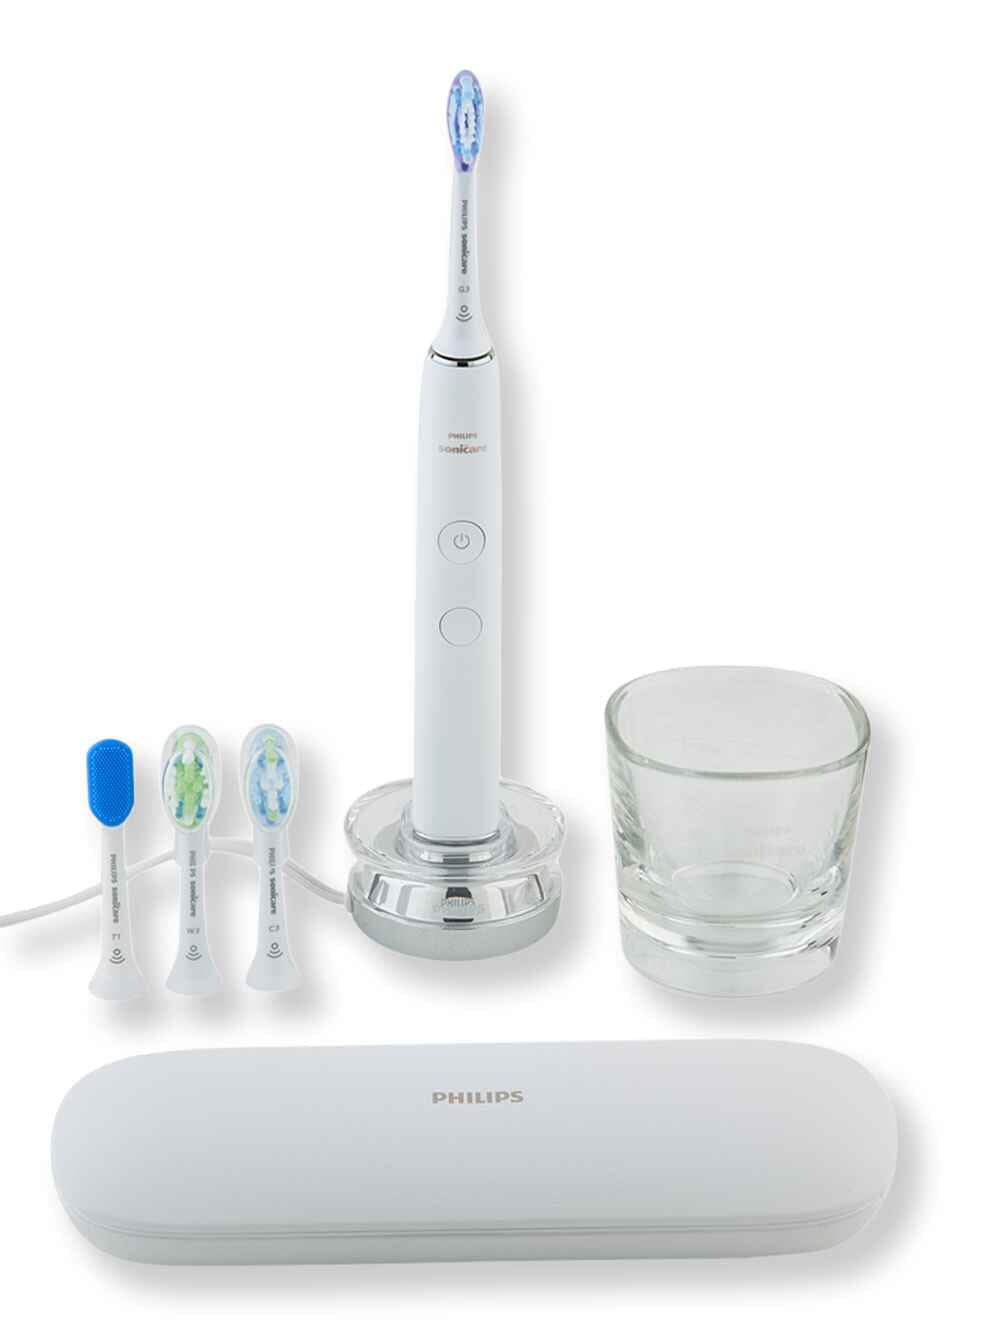 Philips Sonicare Philips Sonicare DiamondClean Smart Electric Rechargeable Toothbrush for Complete Oral Care with Charging Travel Case 5 Modes Series 9500 White HX9924/01 Electric & Manual Toothbrushes 